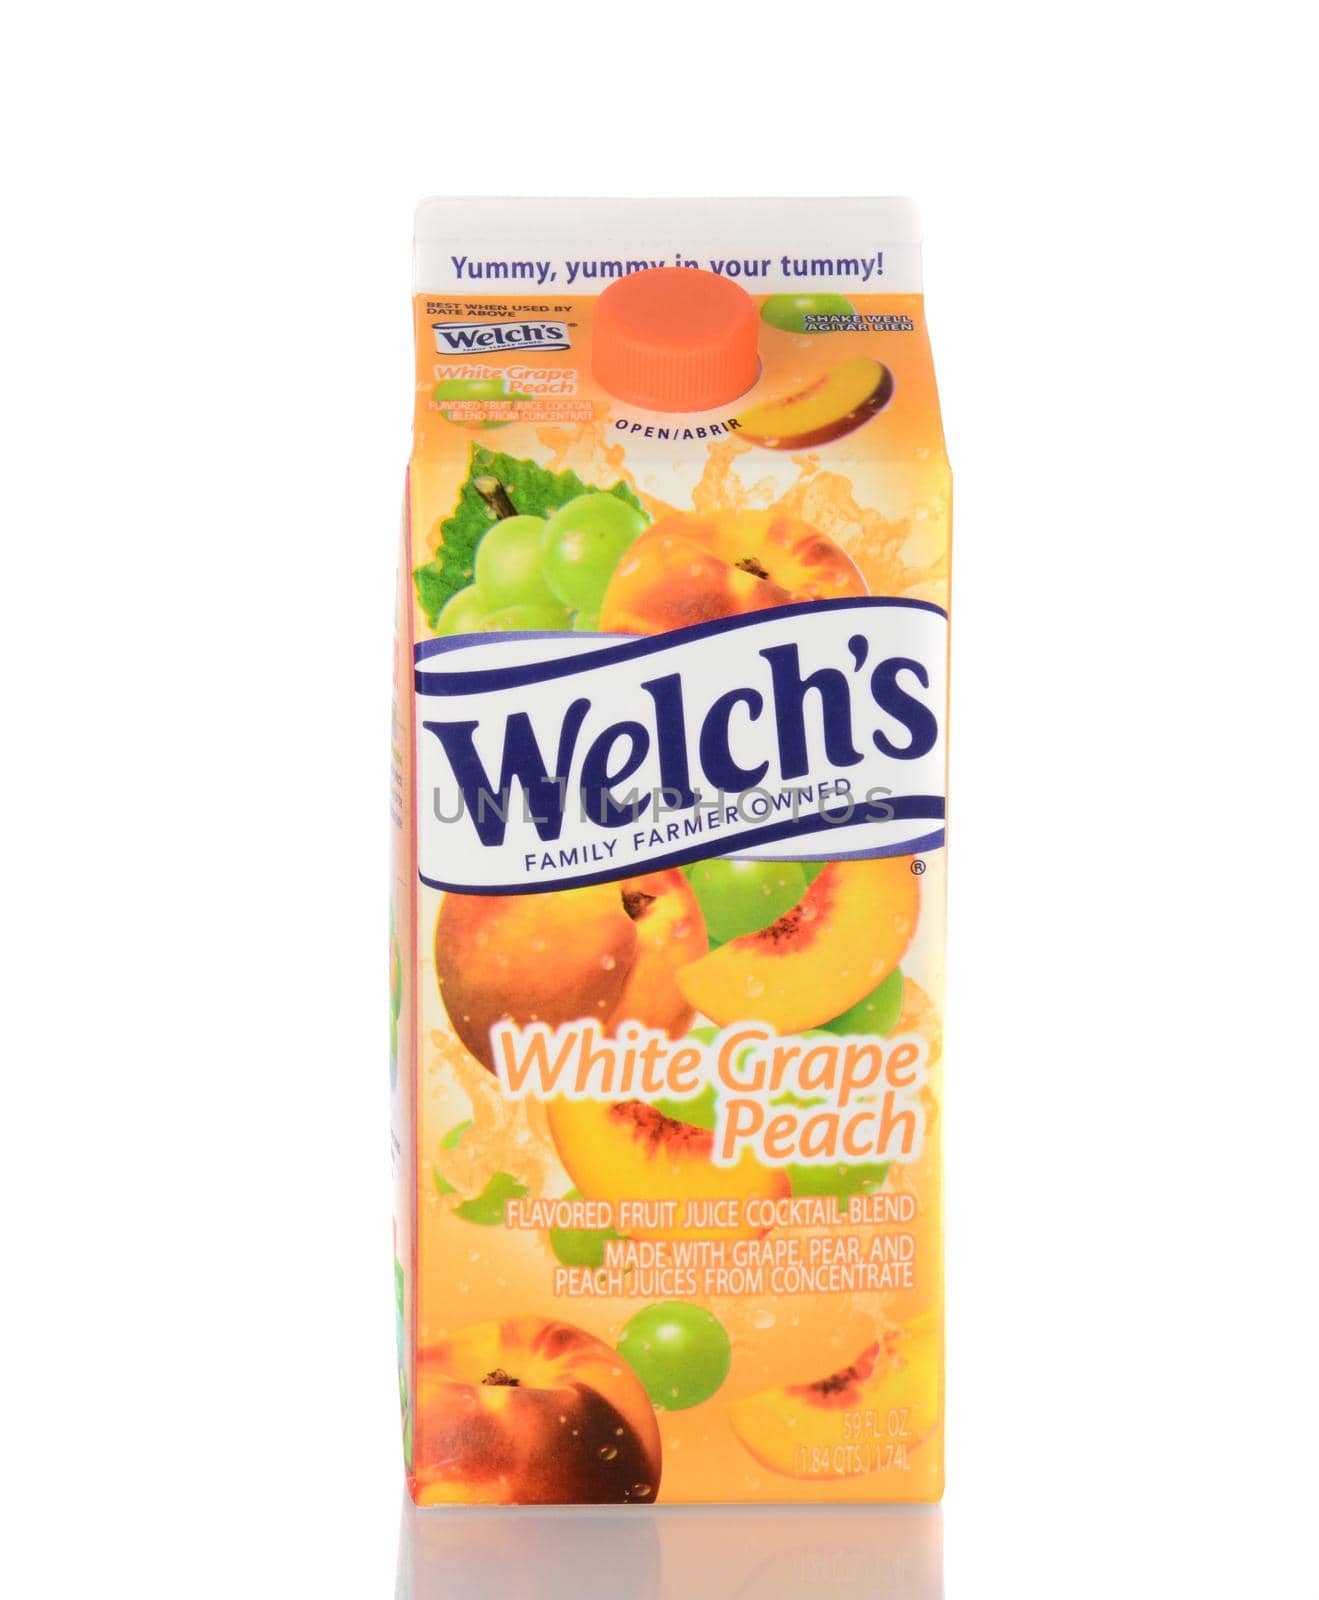 IRVINE, CA - January 05, 2014: A carton of Welchs White Grape Peach Juice. Founded in 1869, by Thomas Bramwell Welch, Welch's is the food processing arm of the National Grape Cooperative Association.